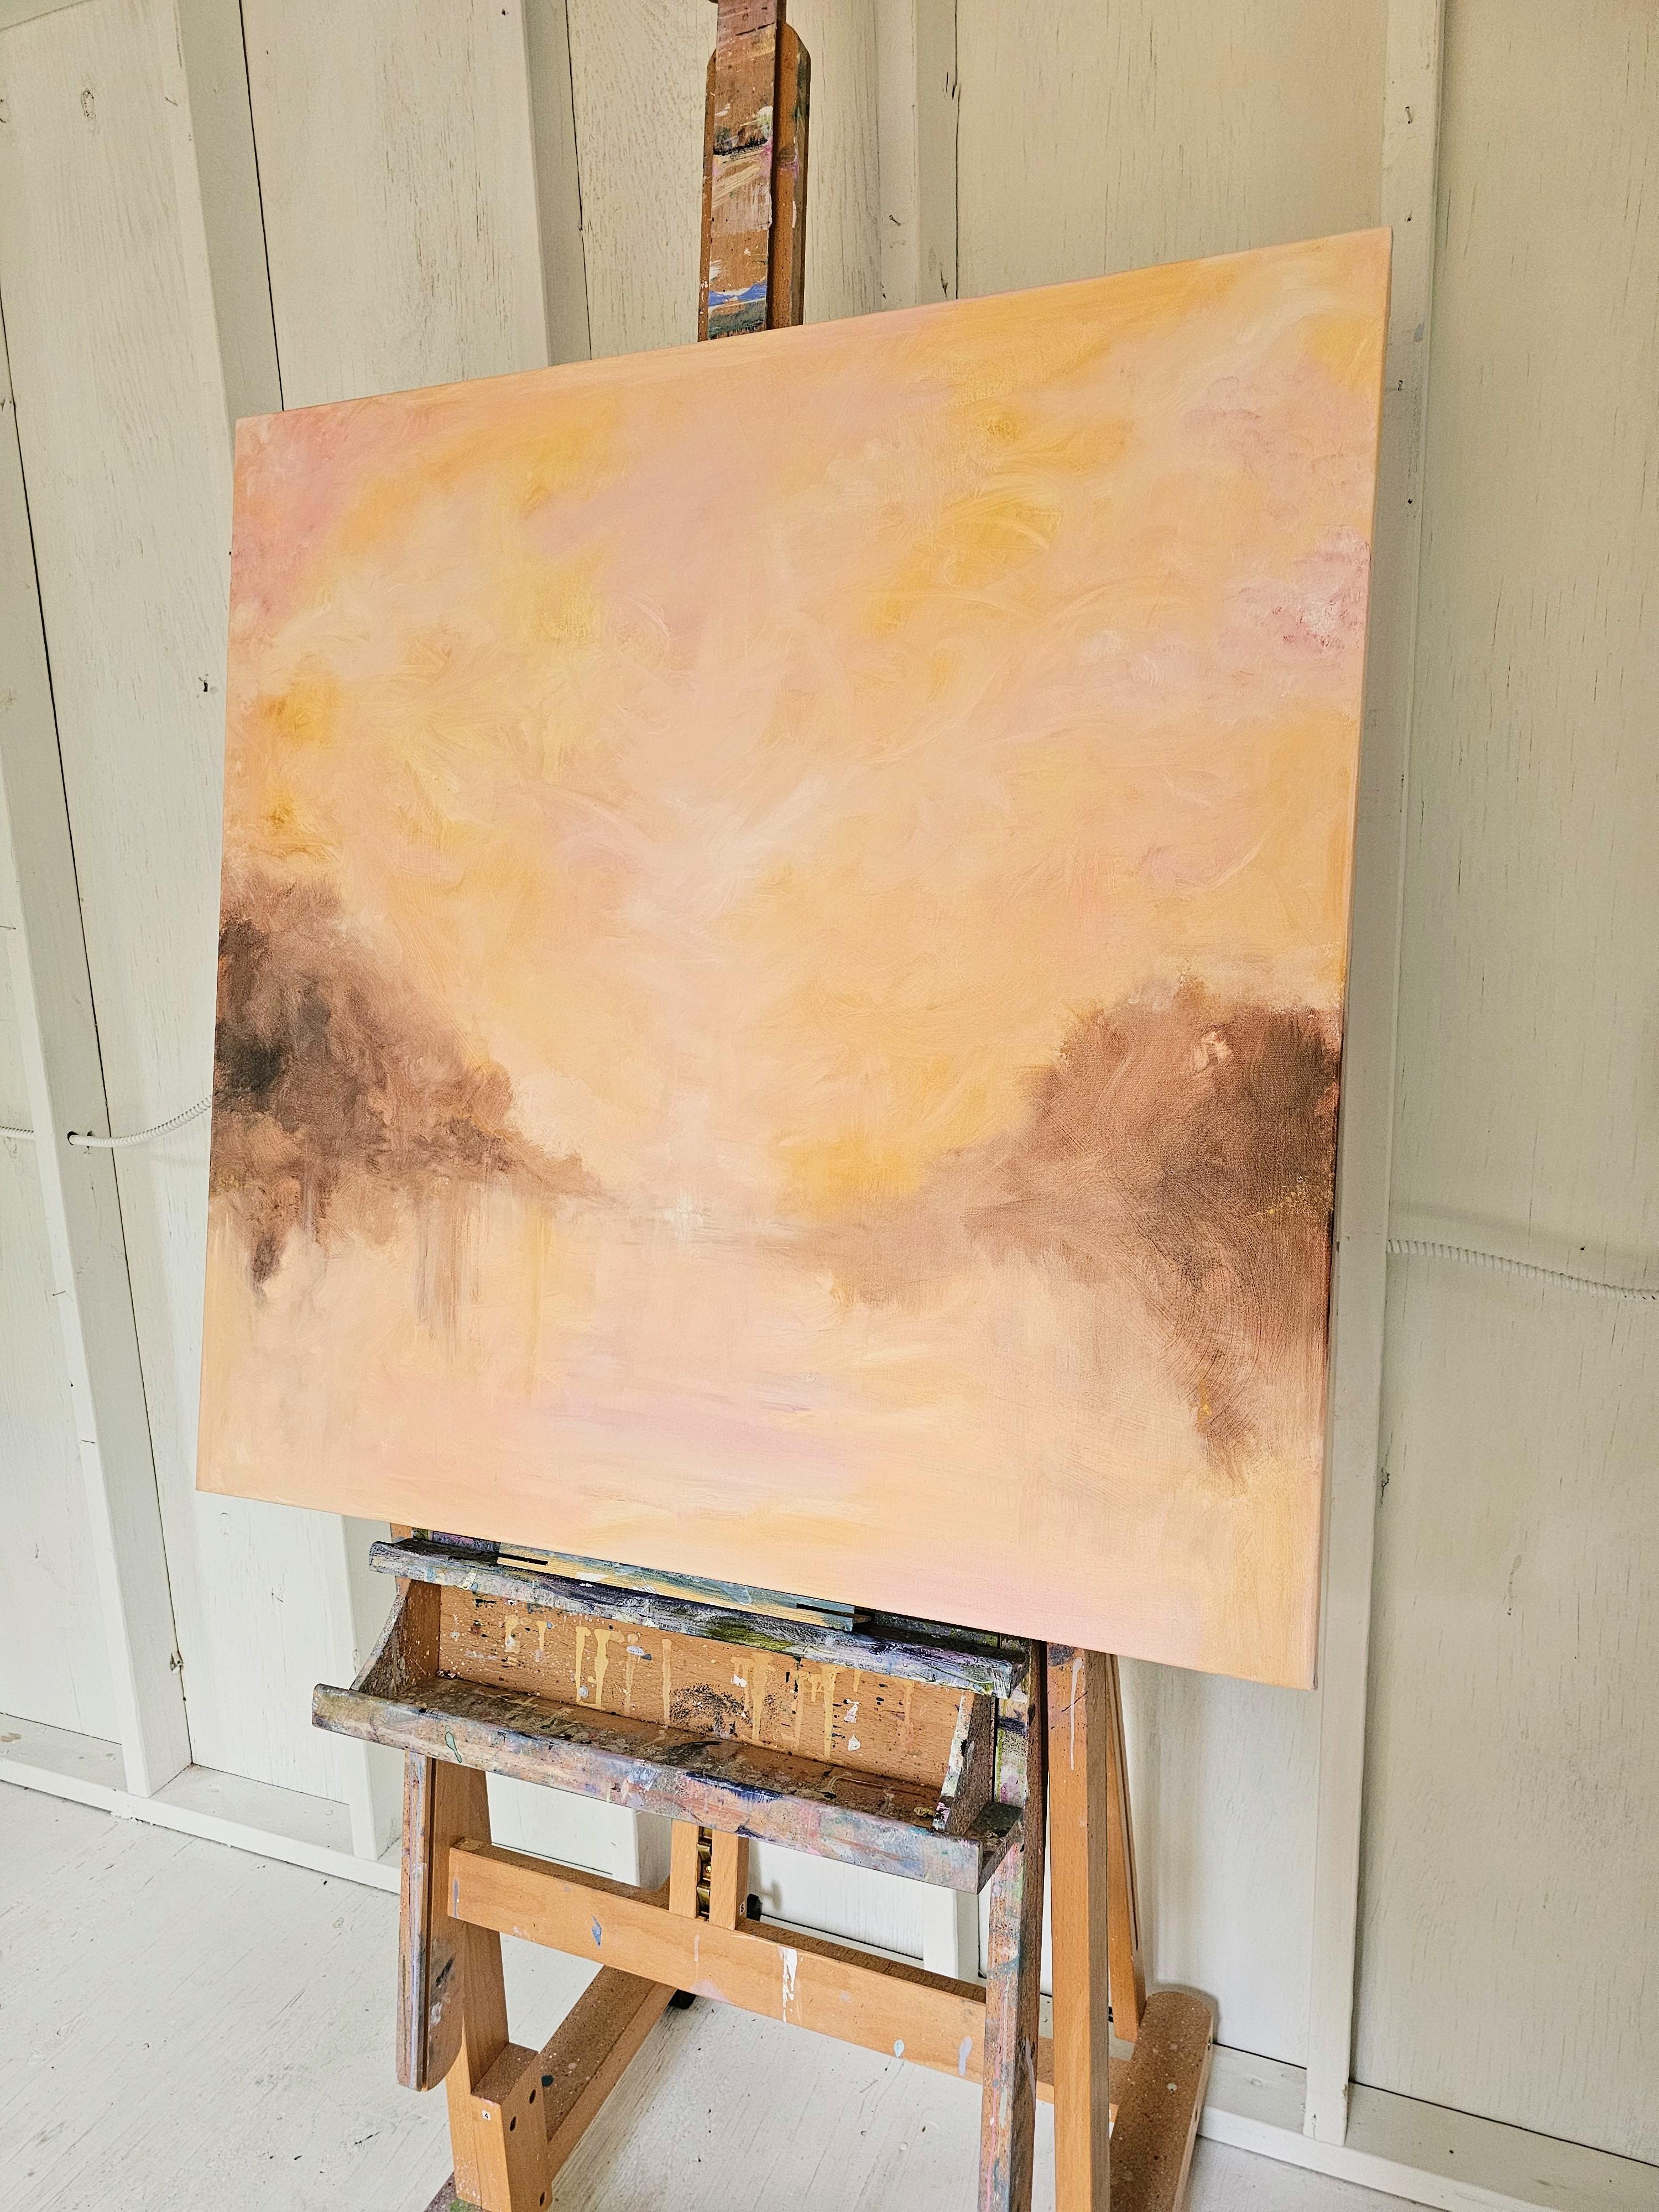 Grand rising - Large peach fuzz color abstract landscape painting For Sale 6